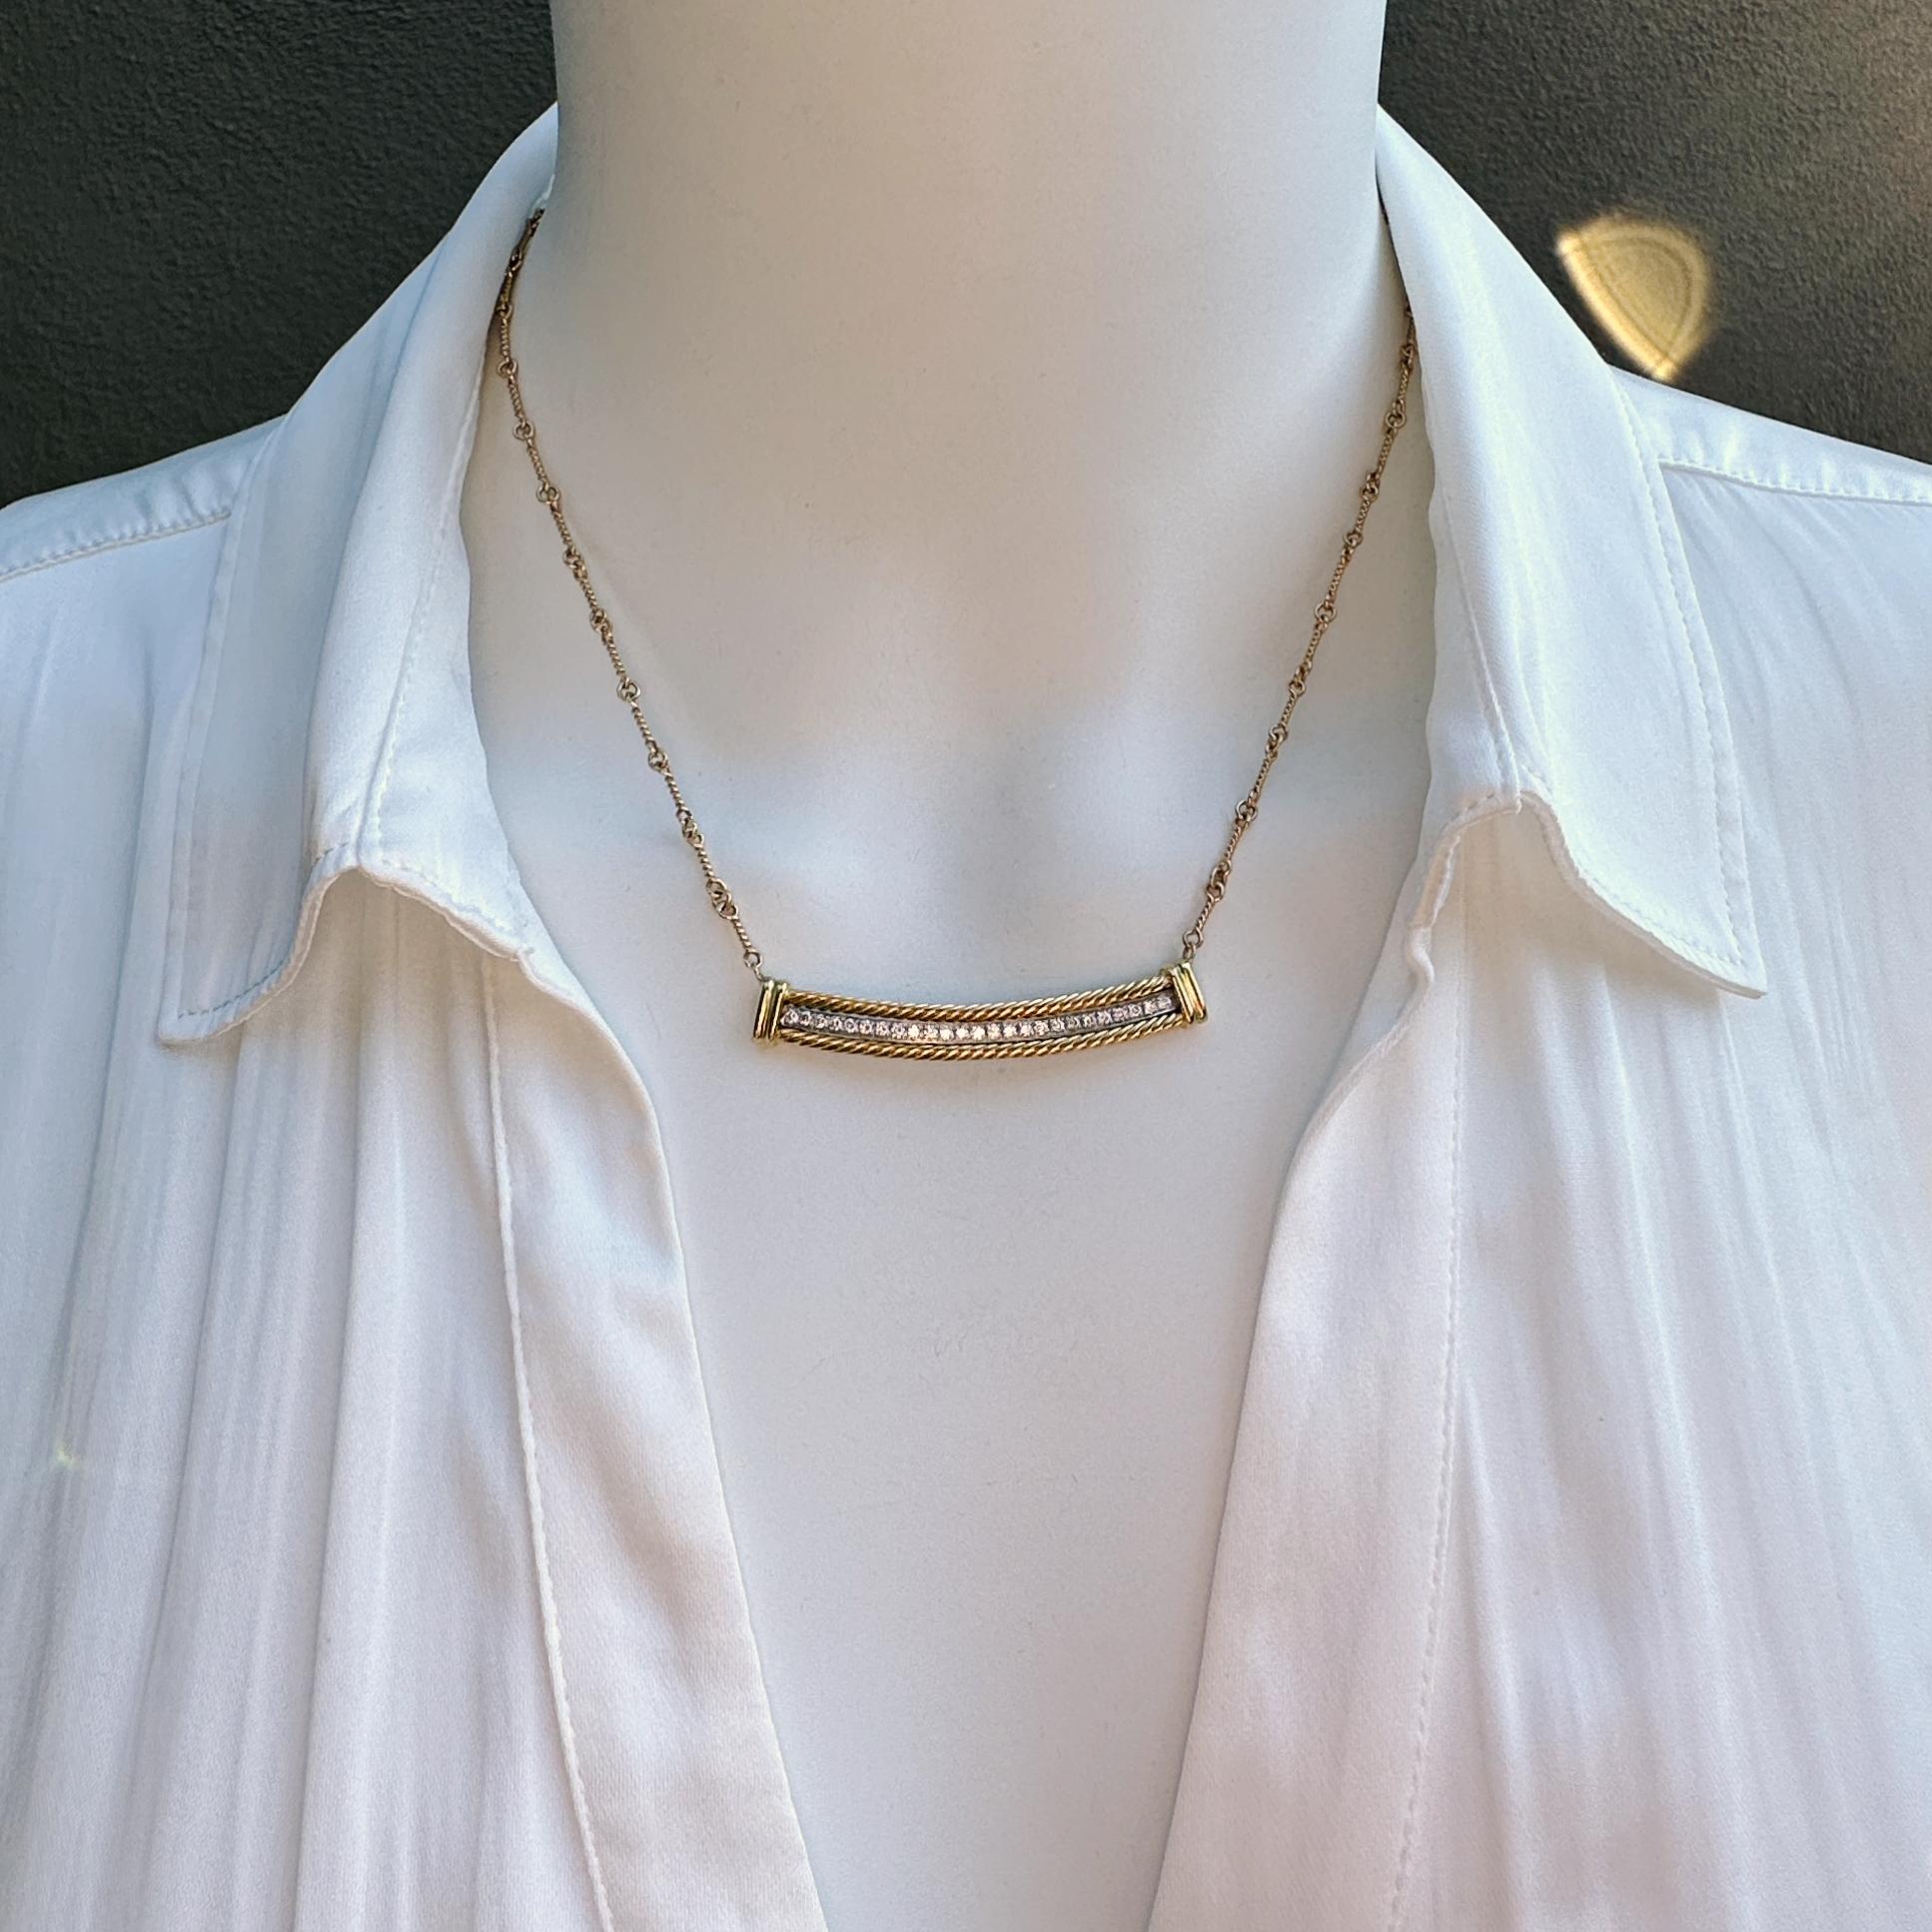 A cut above your standard diamond bar necklace, this one features a slightly curved line of bright white diamonds set on white gold between 18 karat yellow gold cables.  Tidy caps at the ends mark the transition to the cool bar chain with twisty